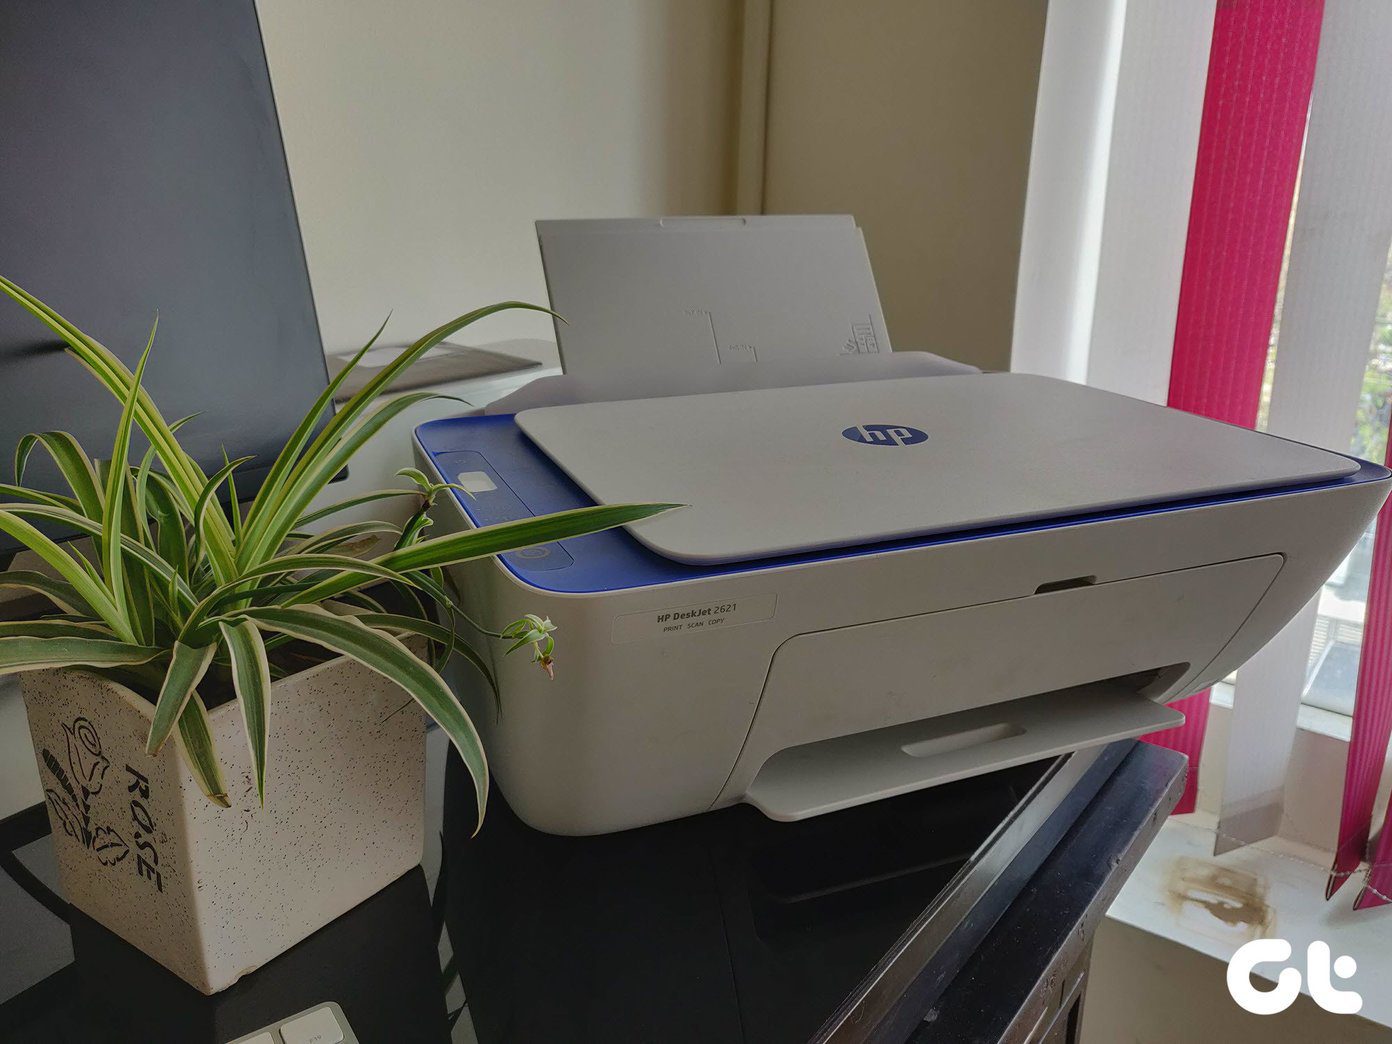 How To Fix Hp Desk Jet 2600 Wi Fi Not Working 2